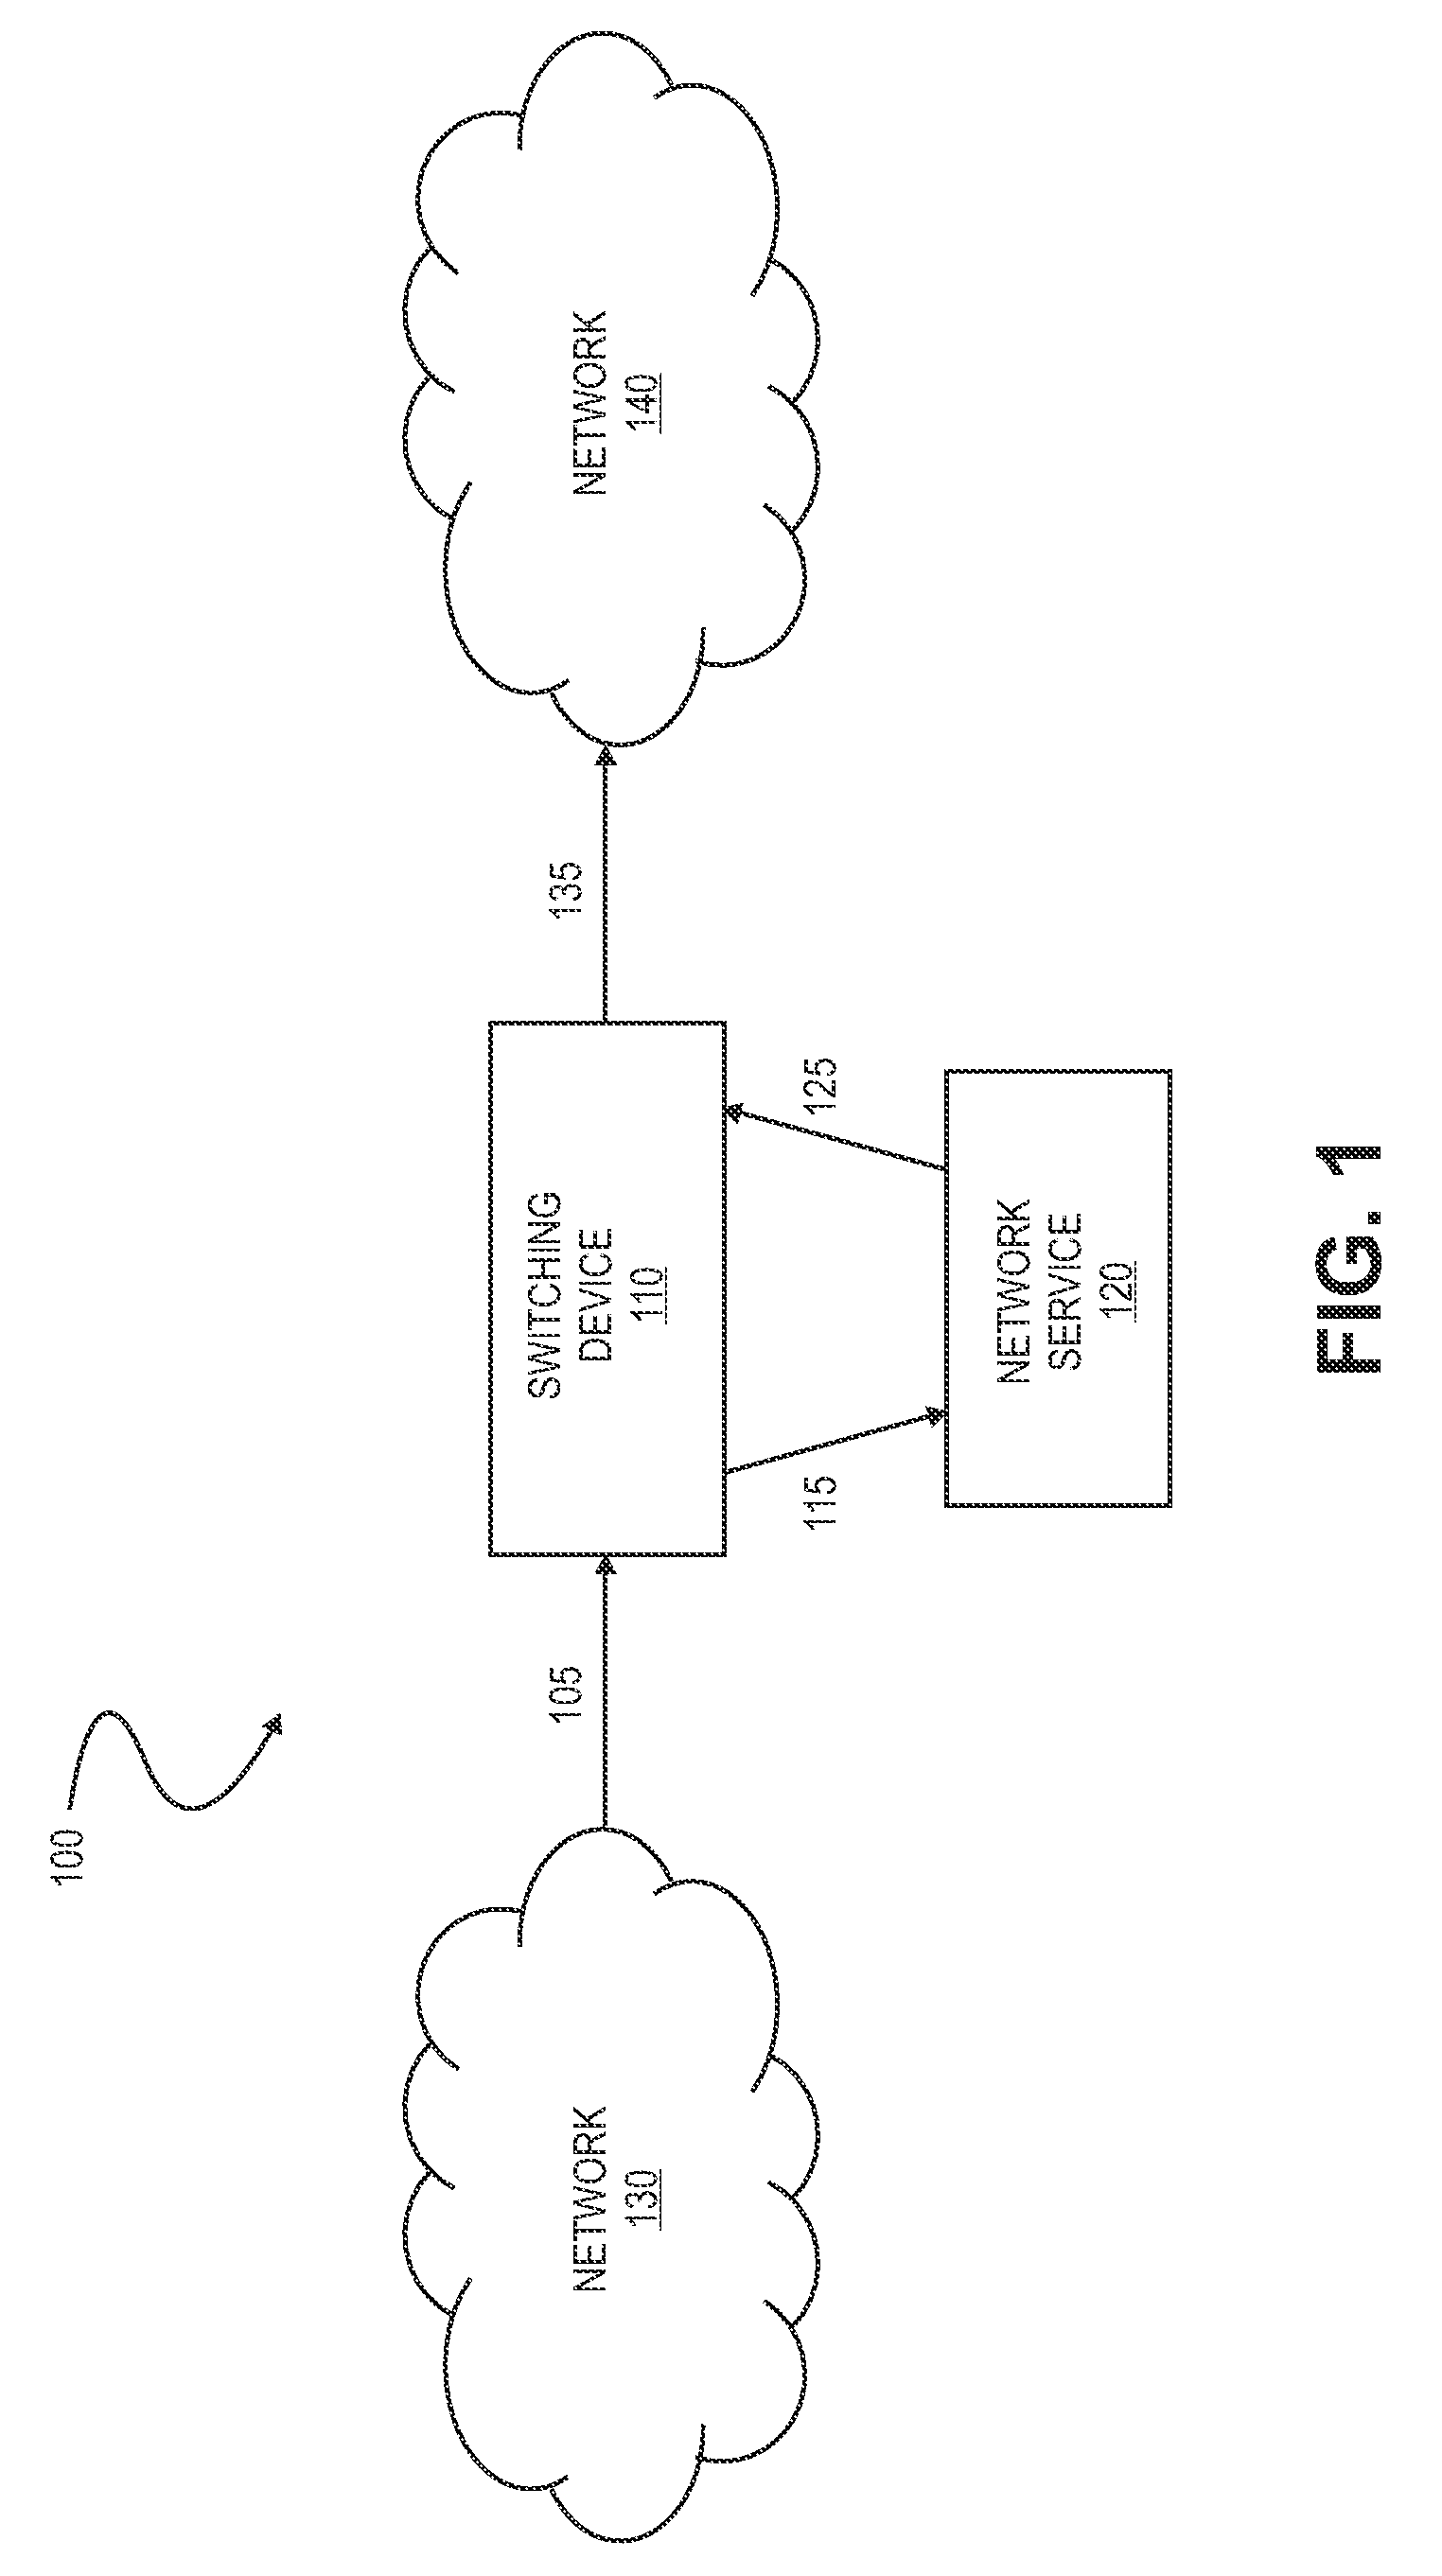 Method and mechanism for port redirects in a network switch